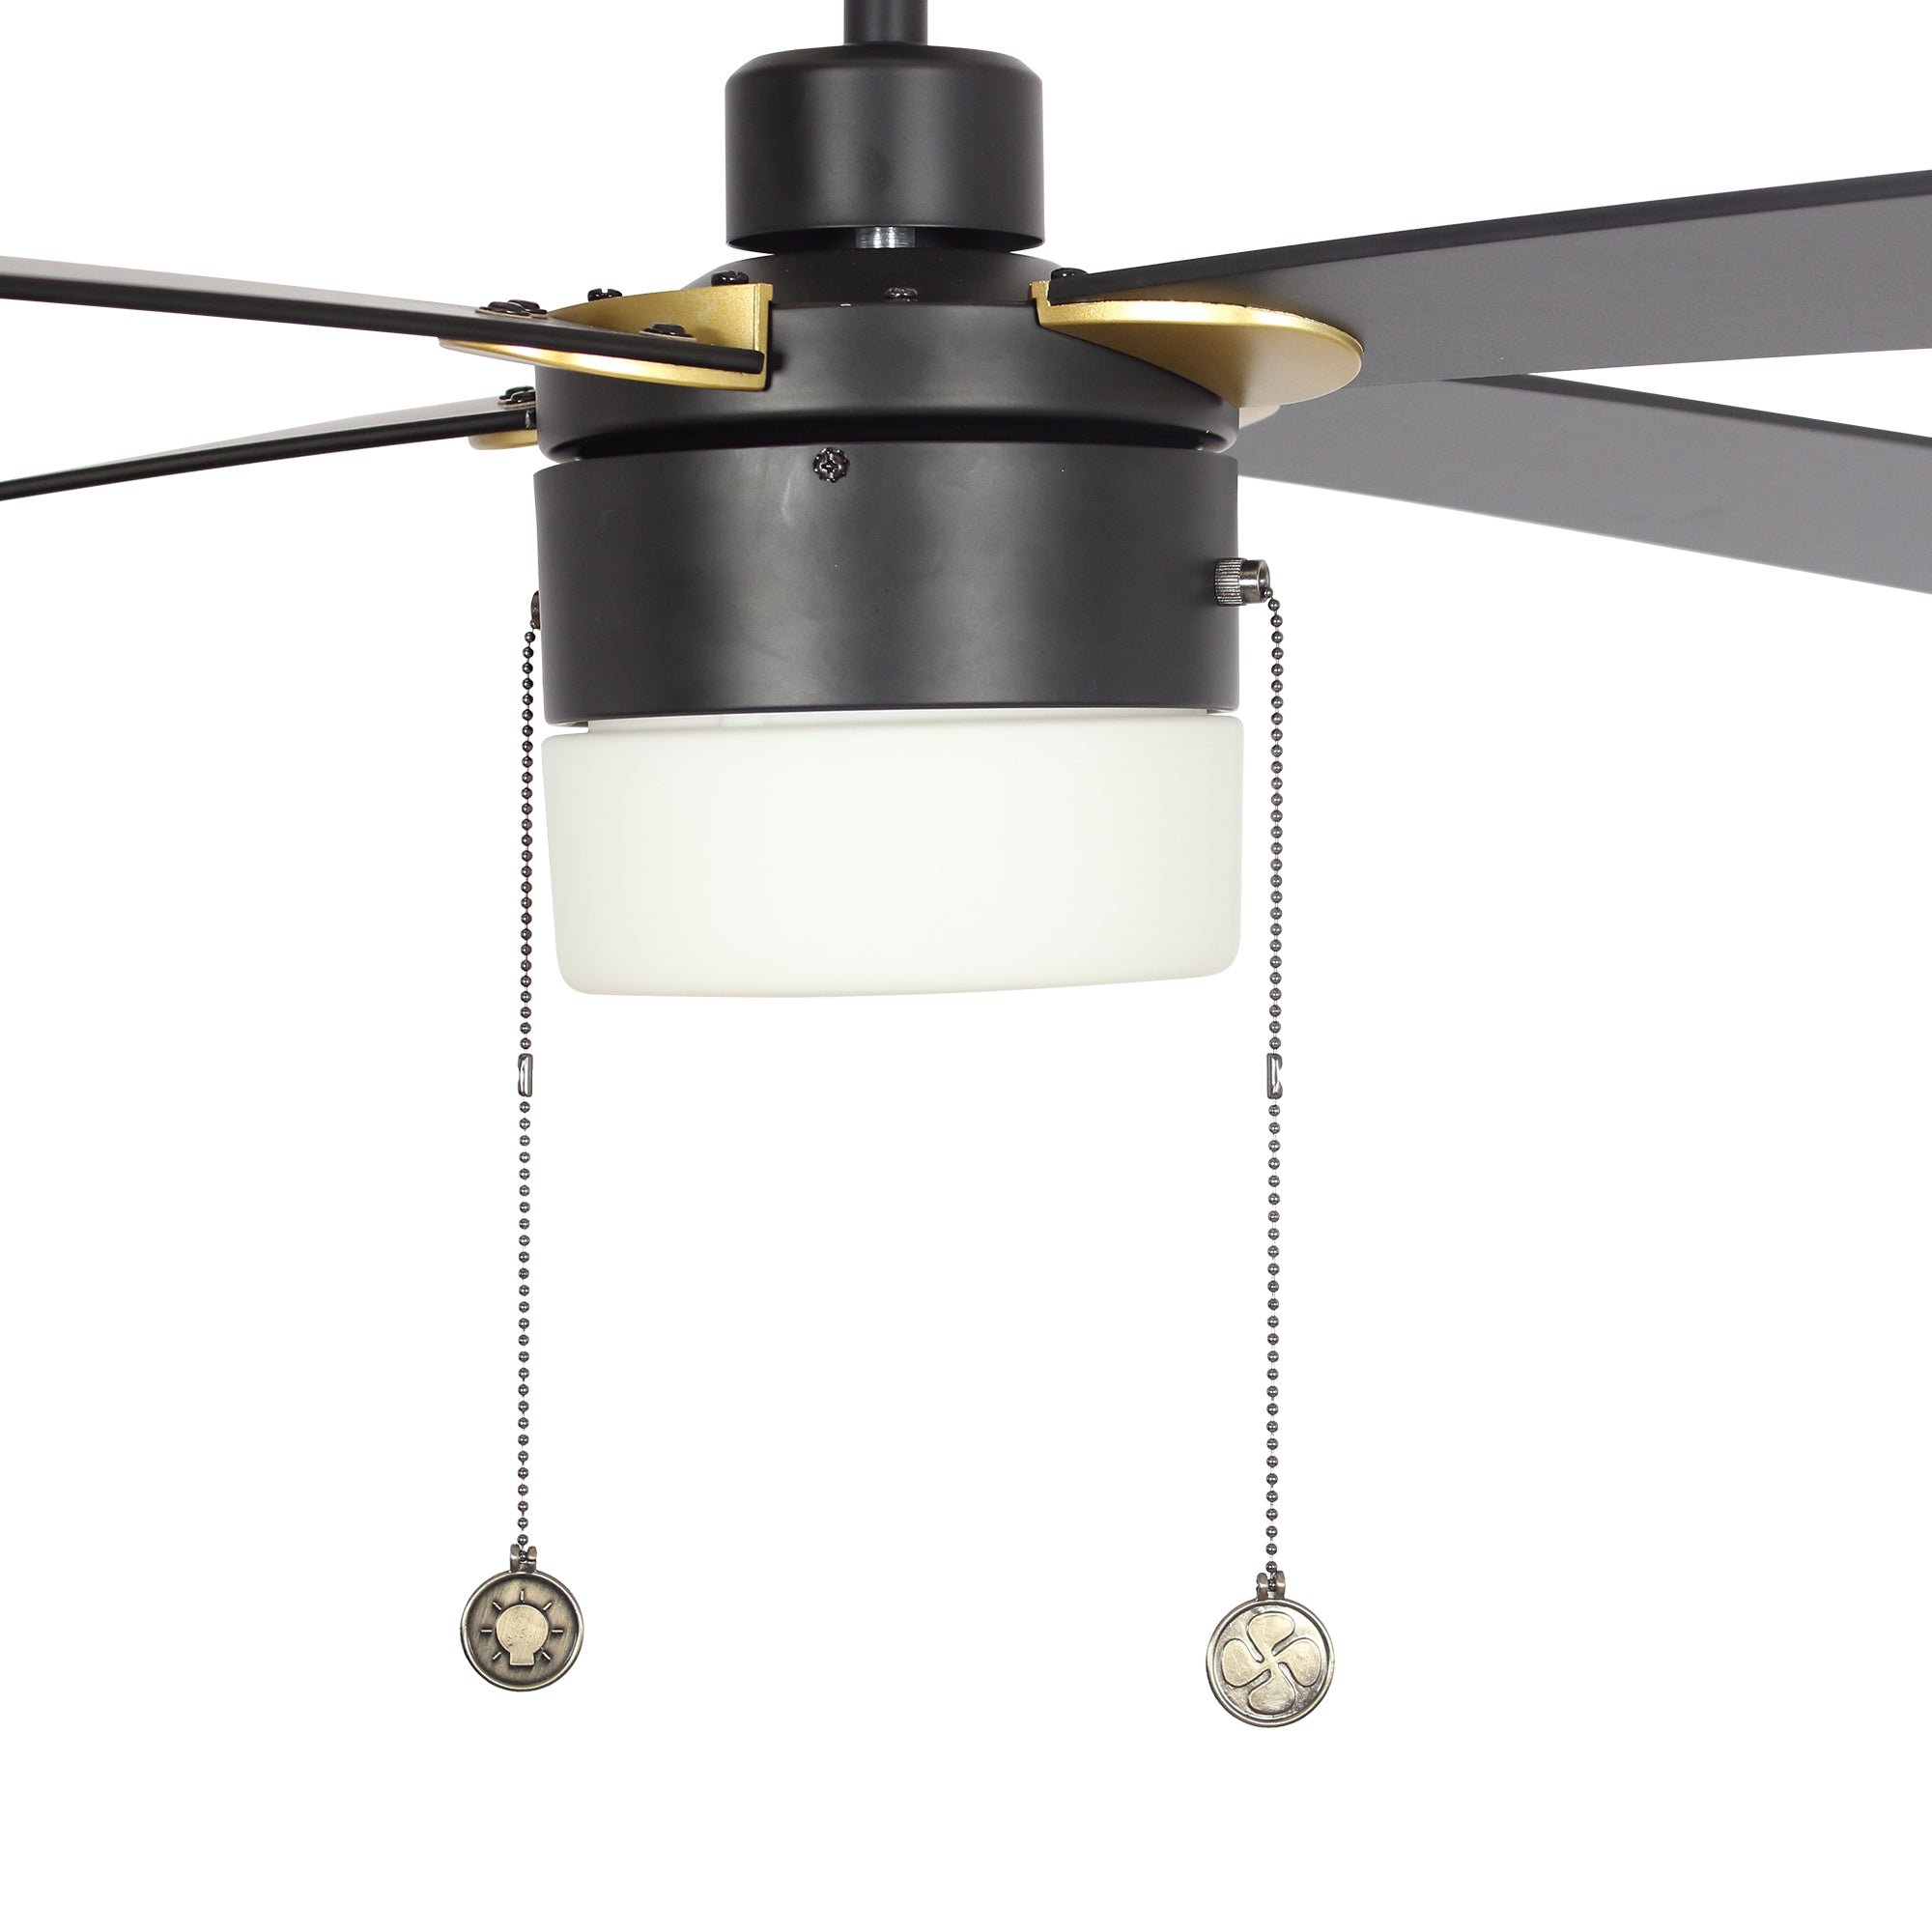 This Smafan Alrich 52''Ceiling Fan keeps your space cool, bright, and stylish. It is a soft modern masterpiece perfect for your large indoor living spaces. This Model ceiling fan is a simplicity designing with Black finish, use Medium Density Fiberboard  blades and compatible with LED bulb and pull chain. The fan feature  pull chain switch to set fan speed and light bulb preferences. #color_black